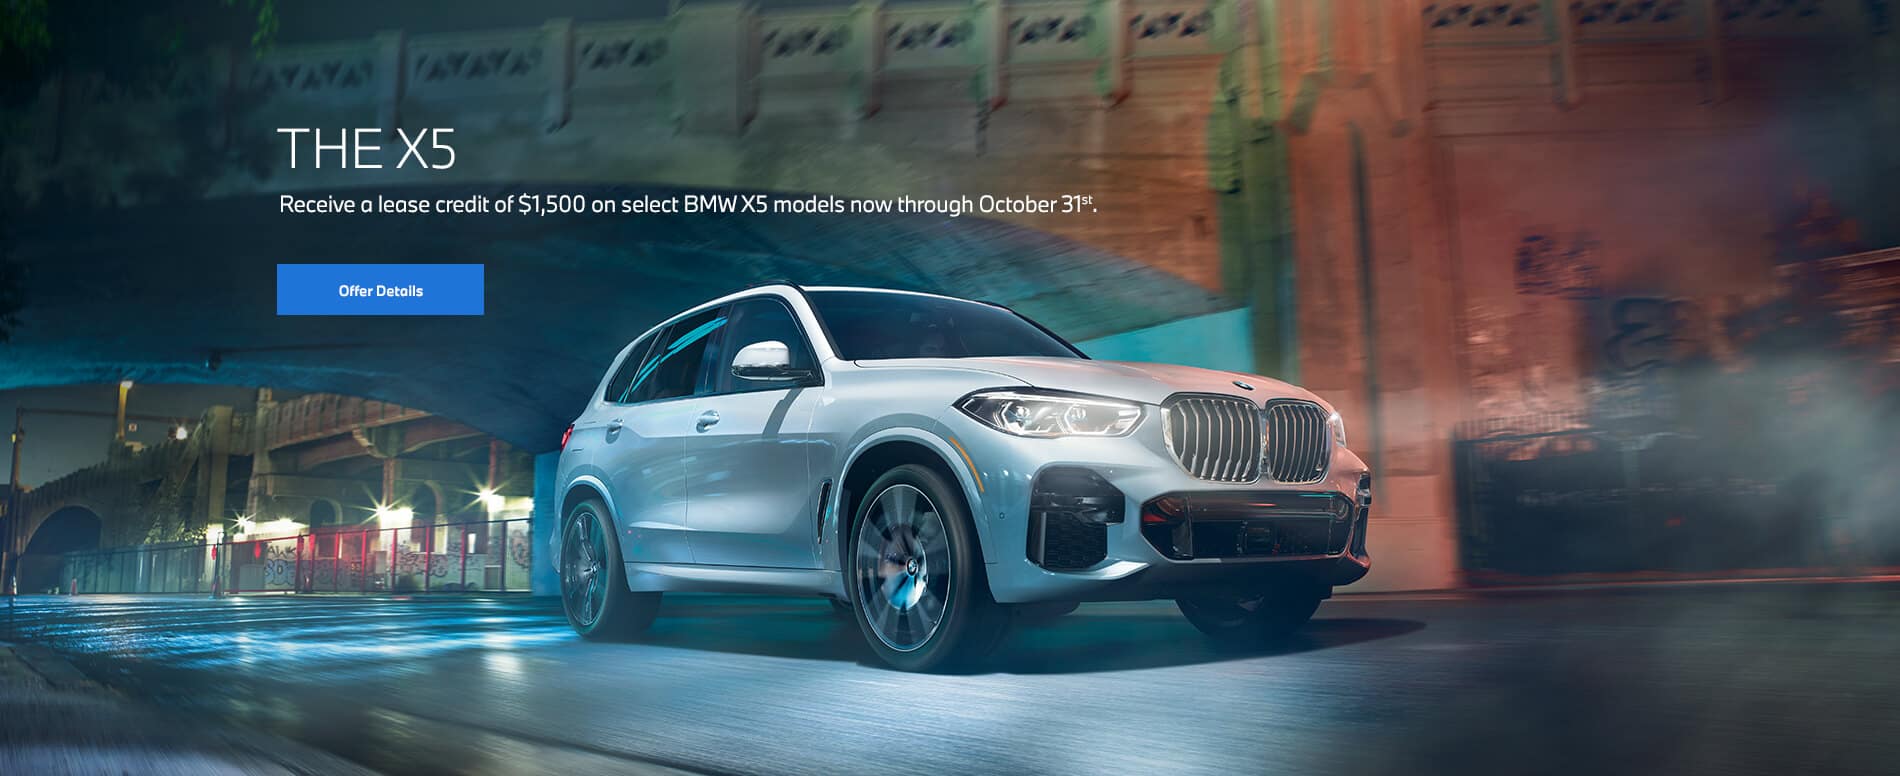 Receive a lease credit of $1,500 on select BMW X5 models now through October 31st.